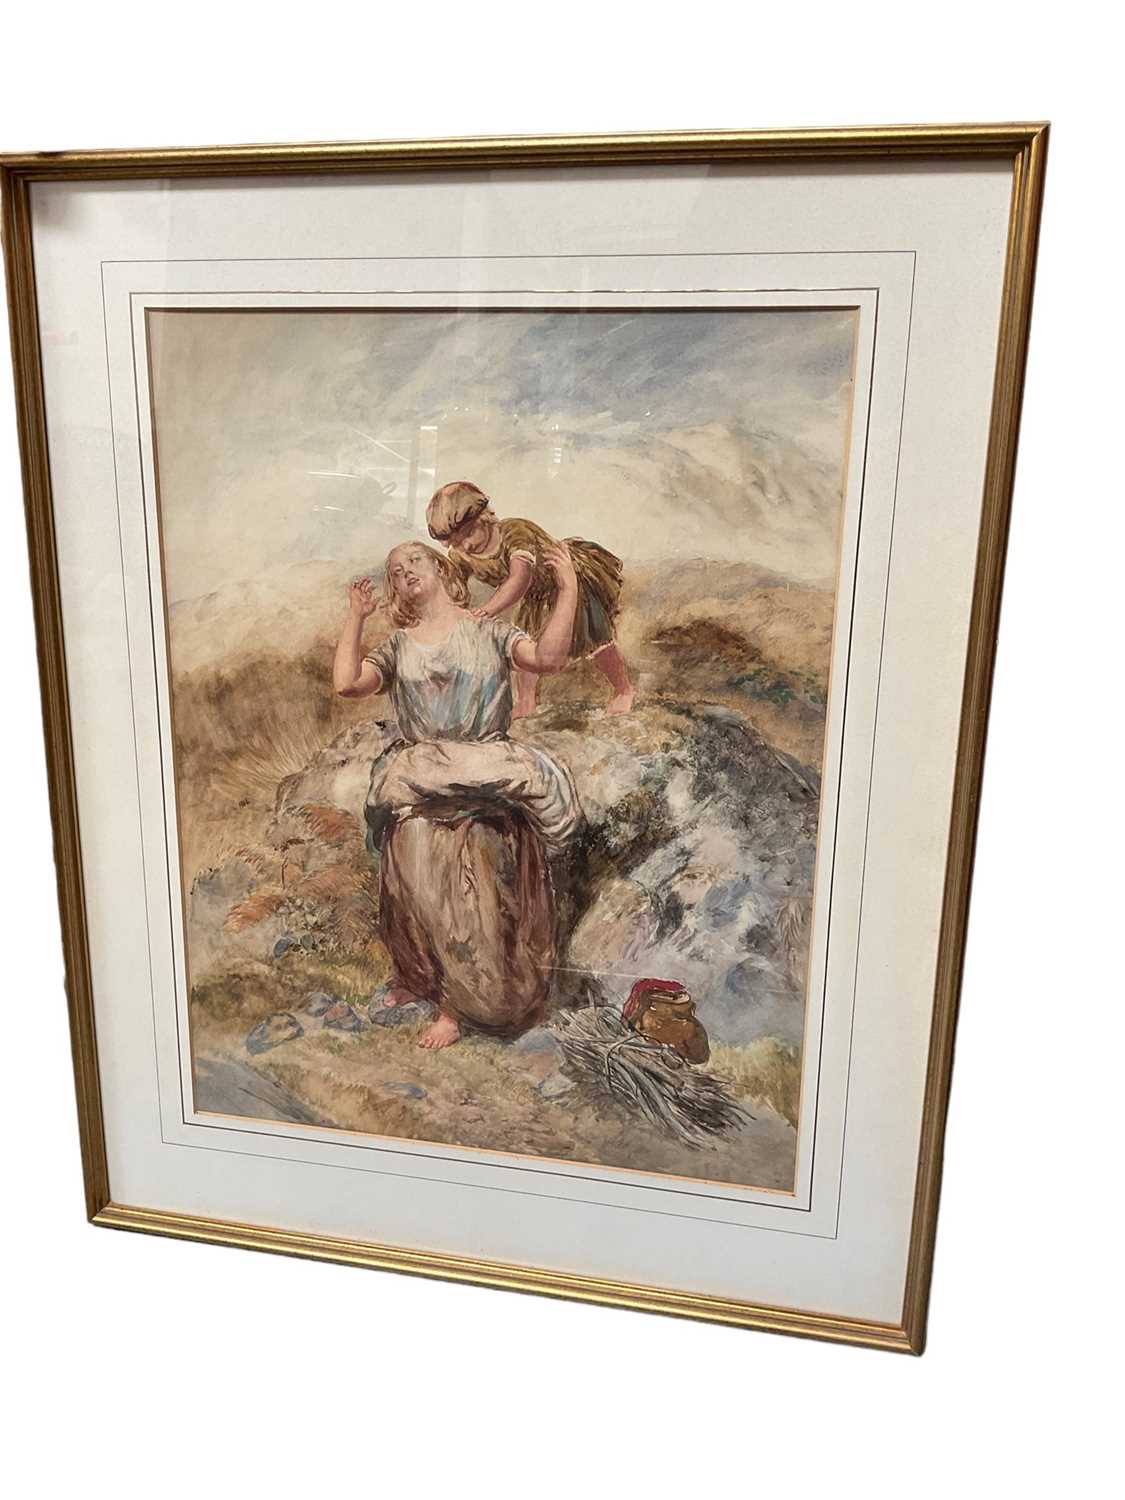 Lot 54 - After Paul Falconer watercolour - The Crooked path, 61 x 47cm, glazed frame